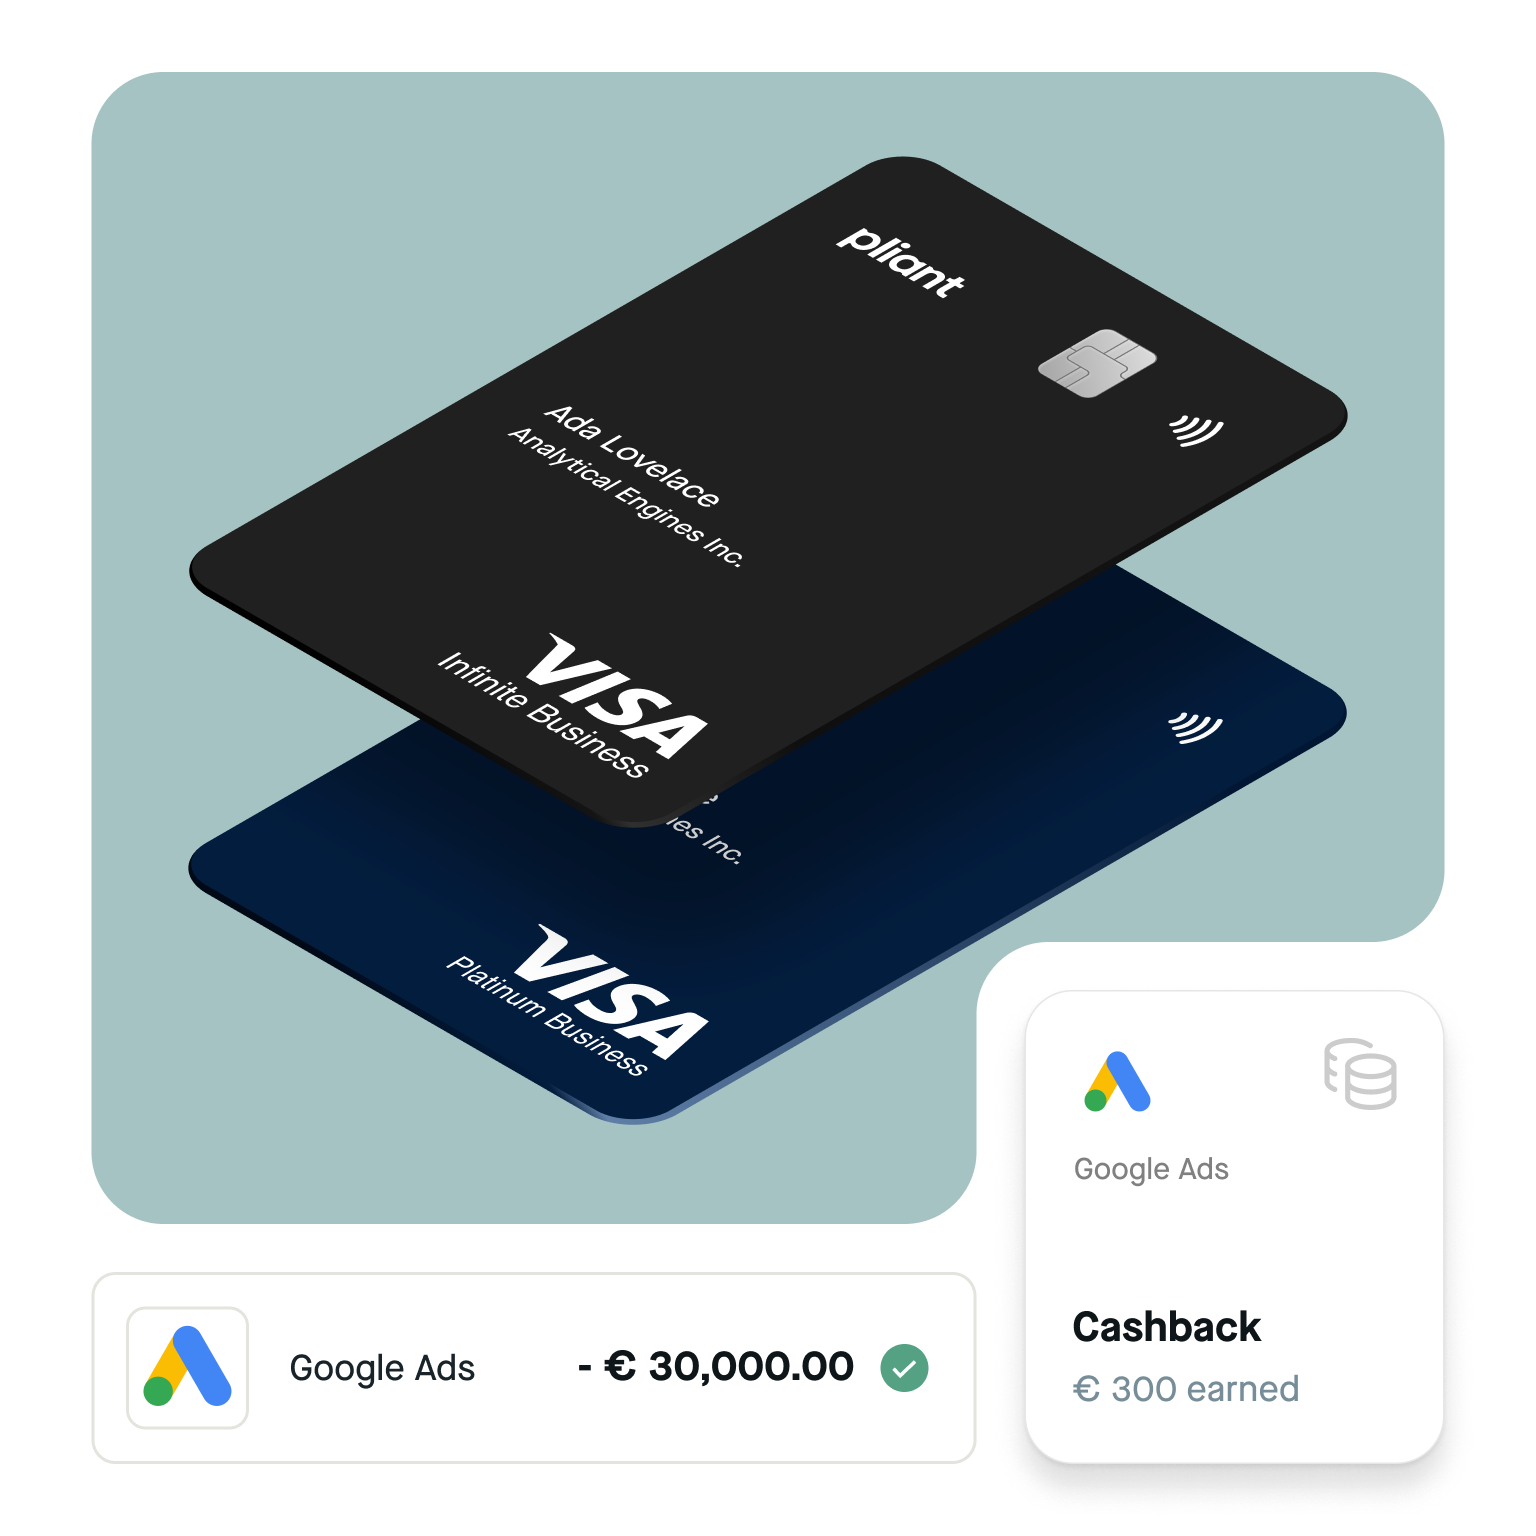 Pliant's physical business credit cards